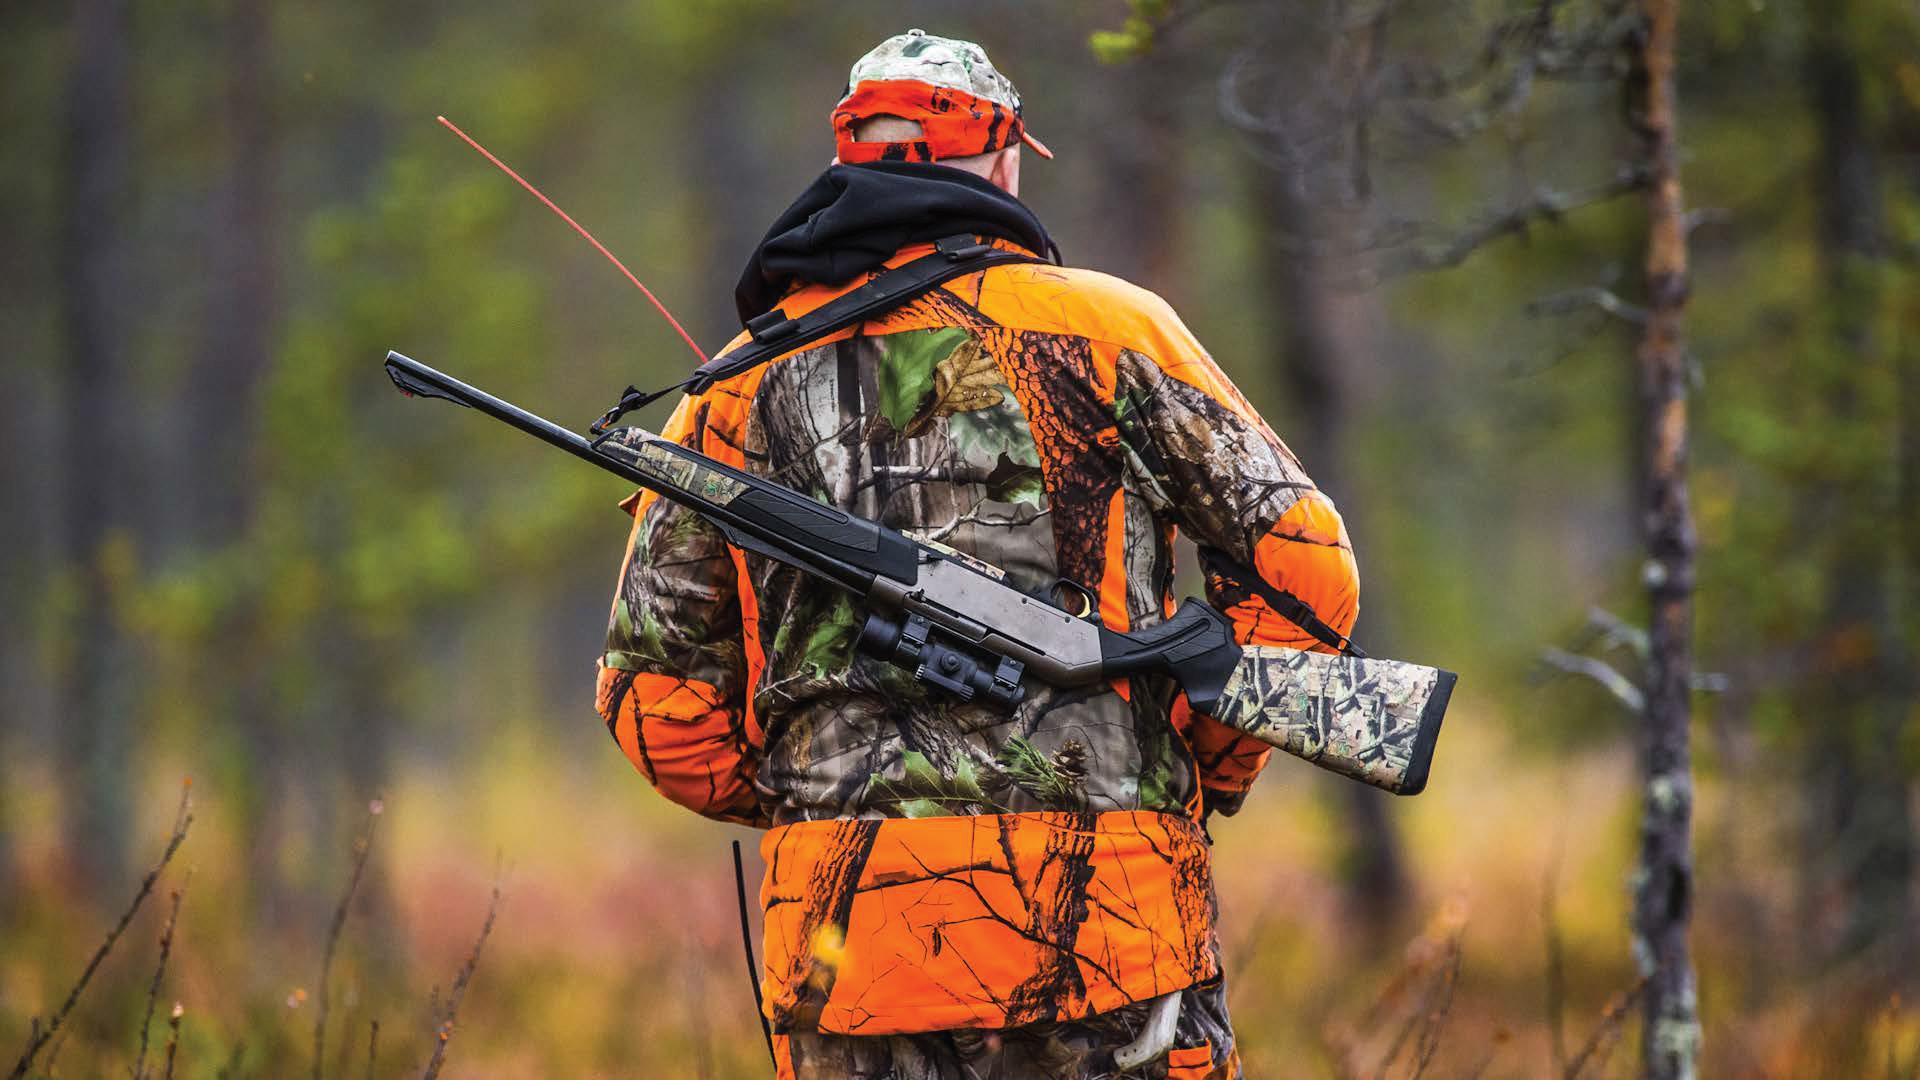 Hunting season—keep safety in mind and follow the rules